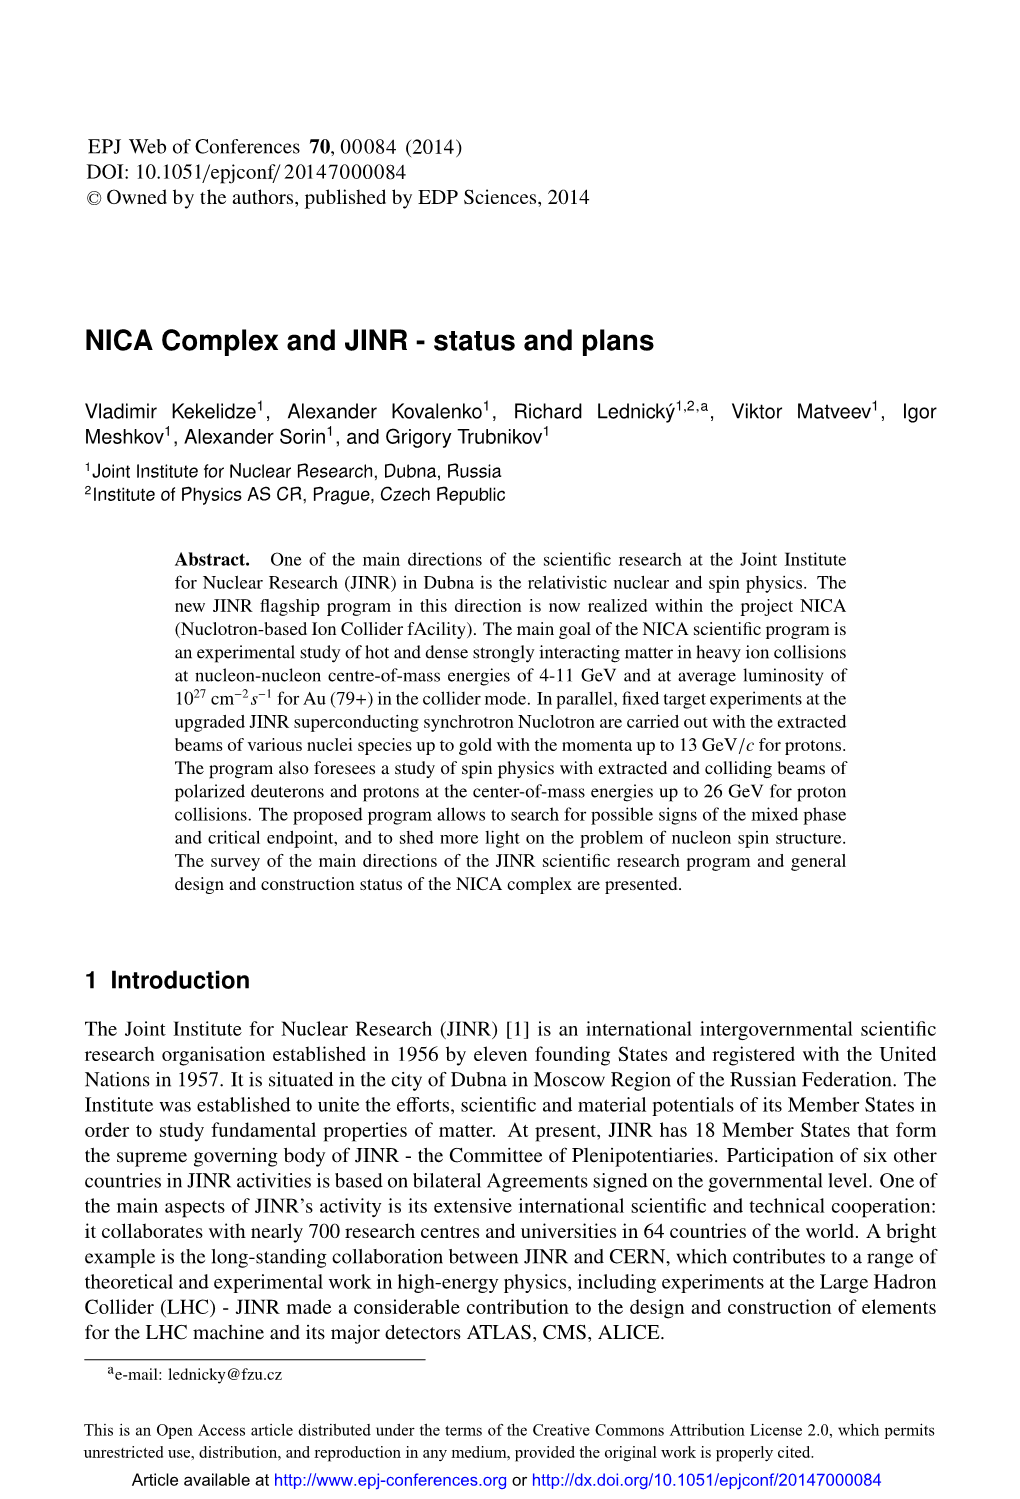 NICA Complex and JINR - Status and Plans